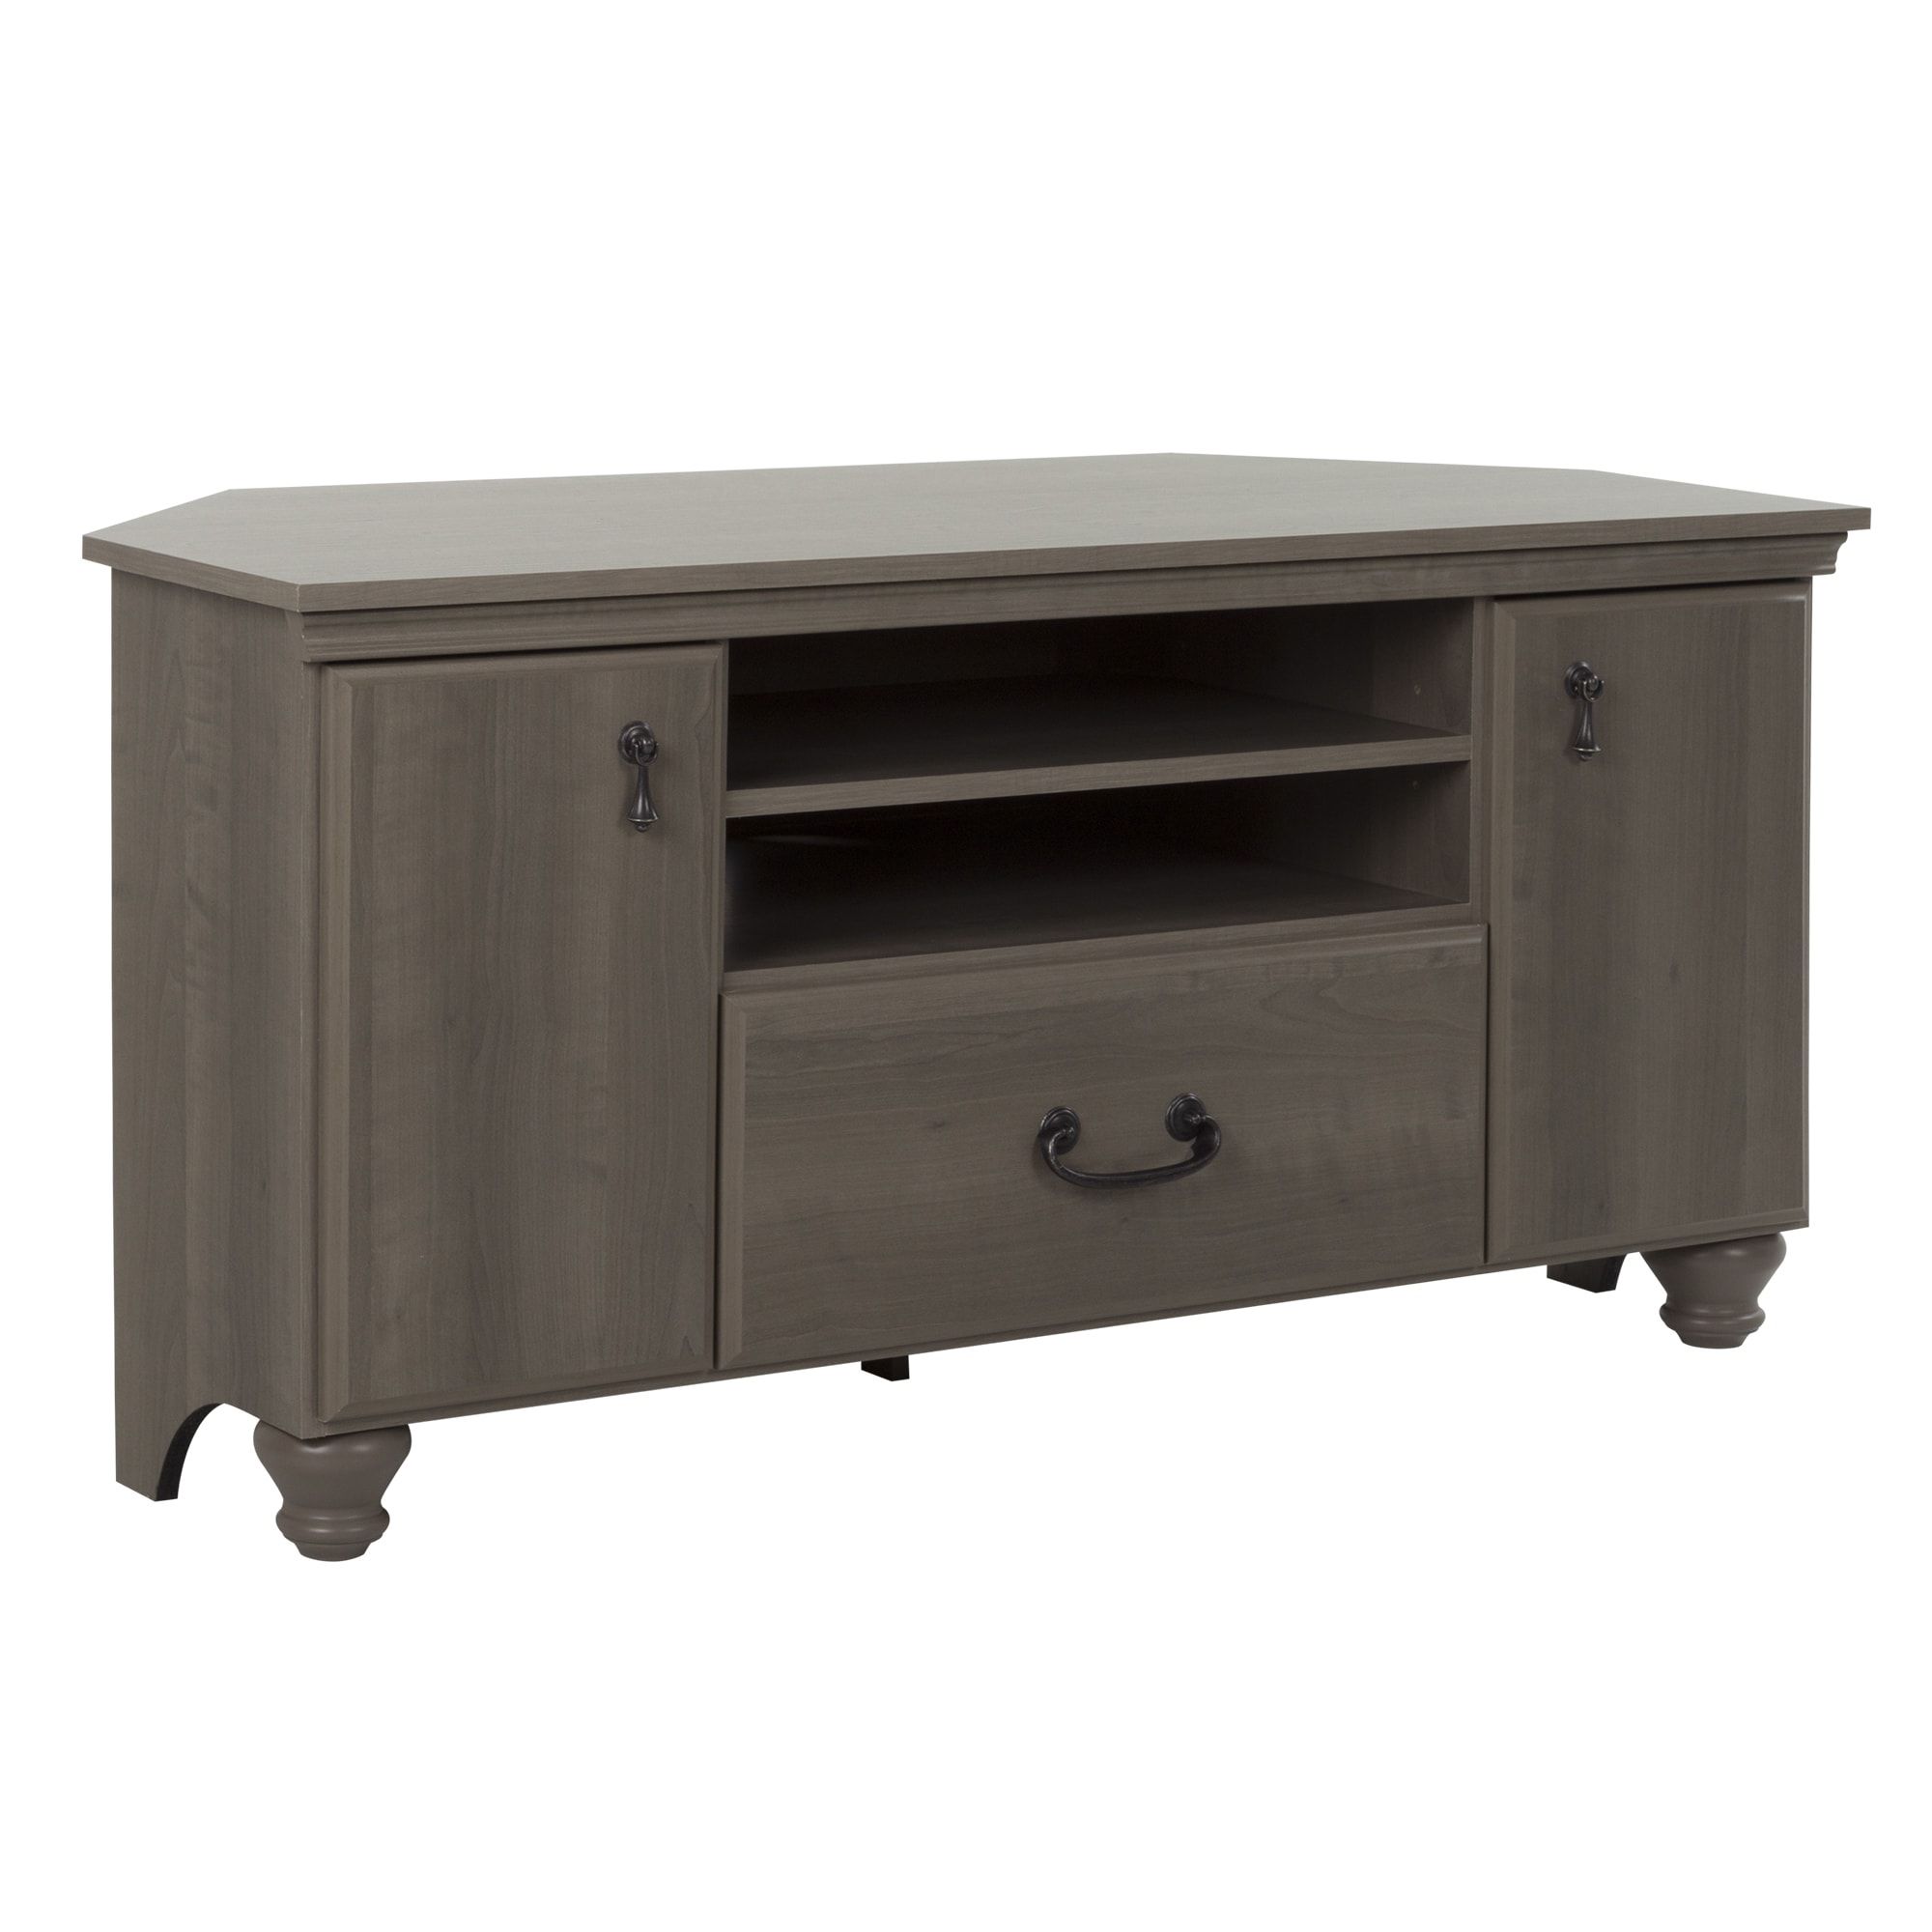 Exhibit Corner Tv Stands Inside Popular South Shore Grey Laminate Corner Tv Stand With Adjustable (View 10 of 10)